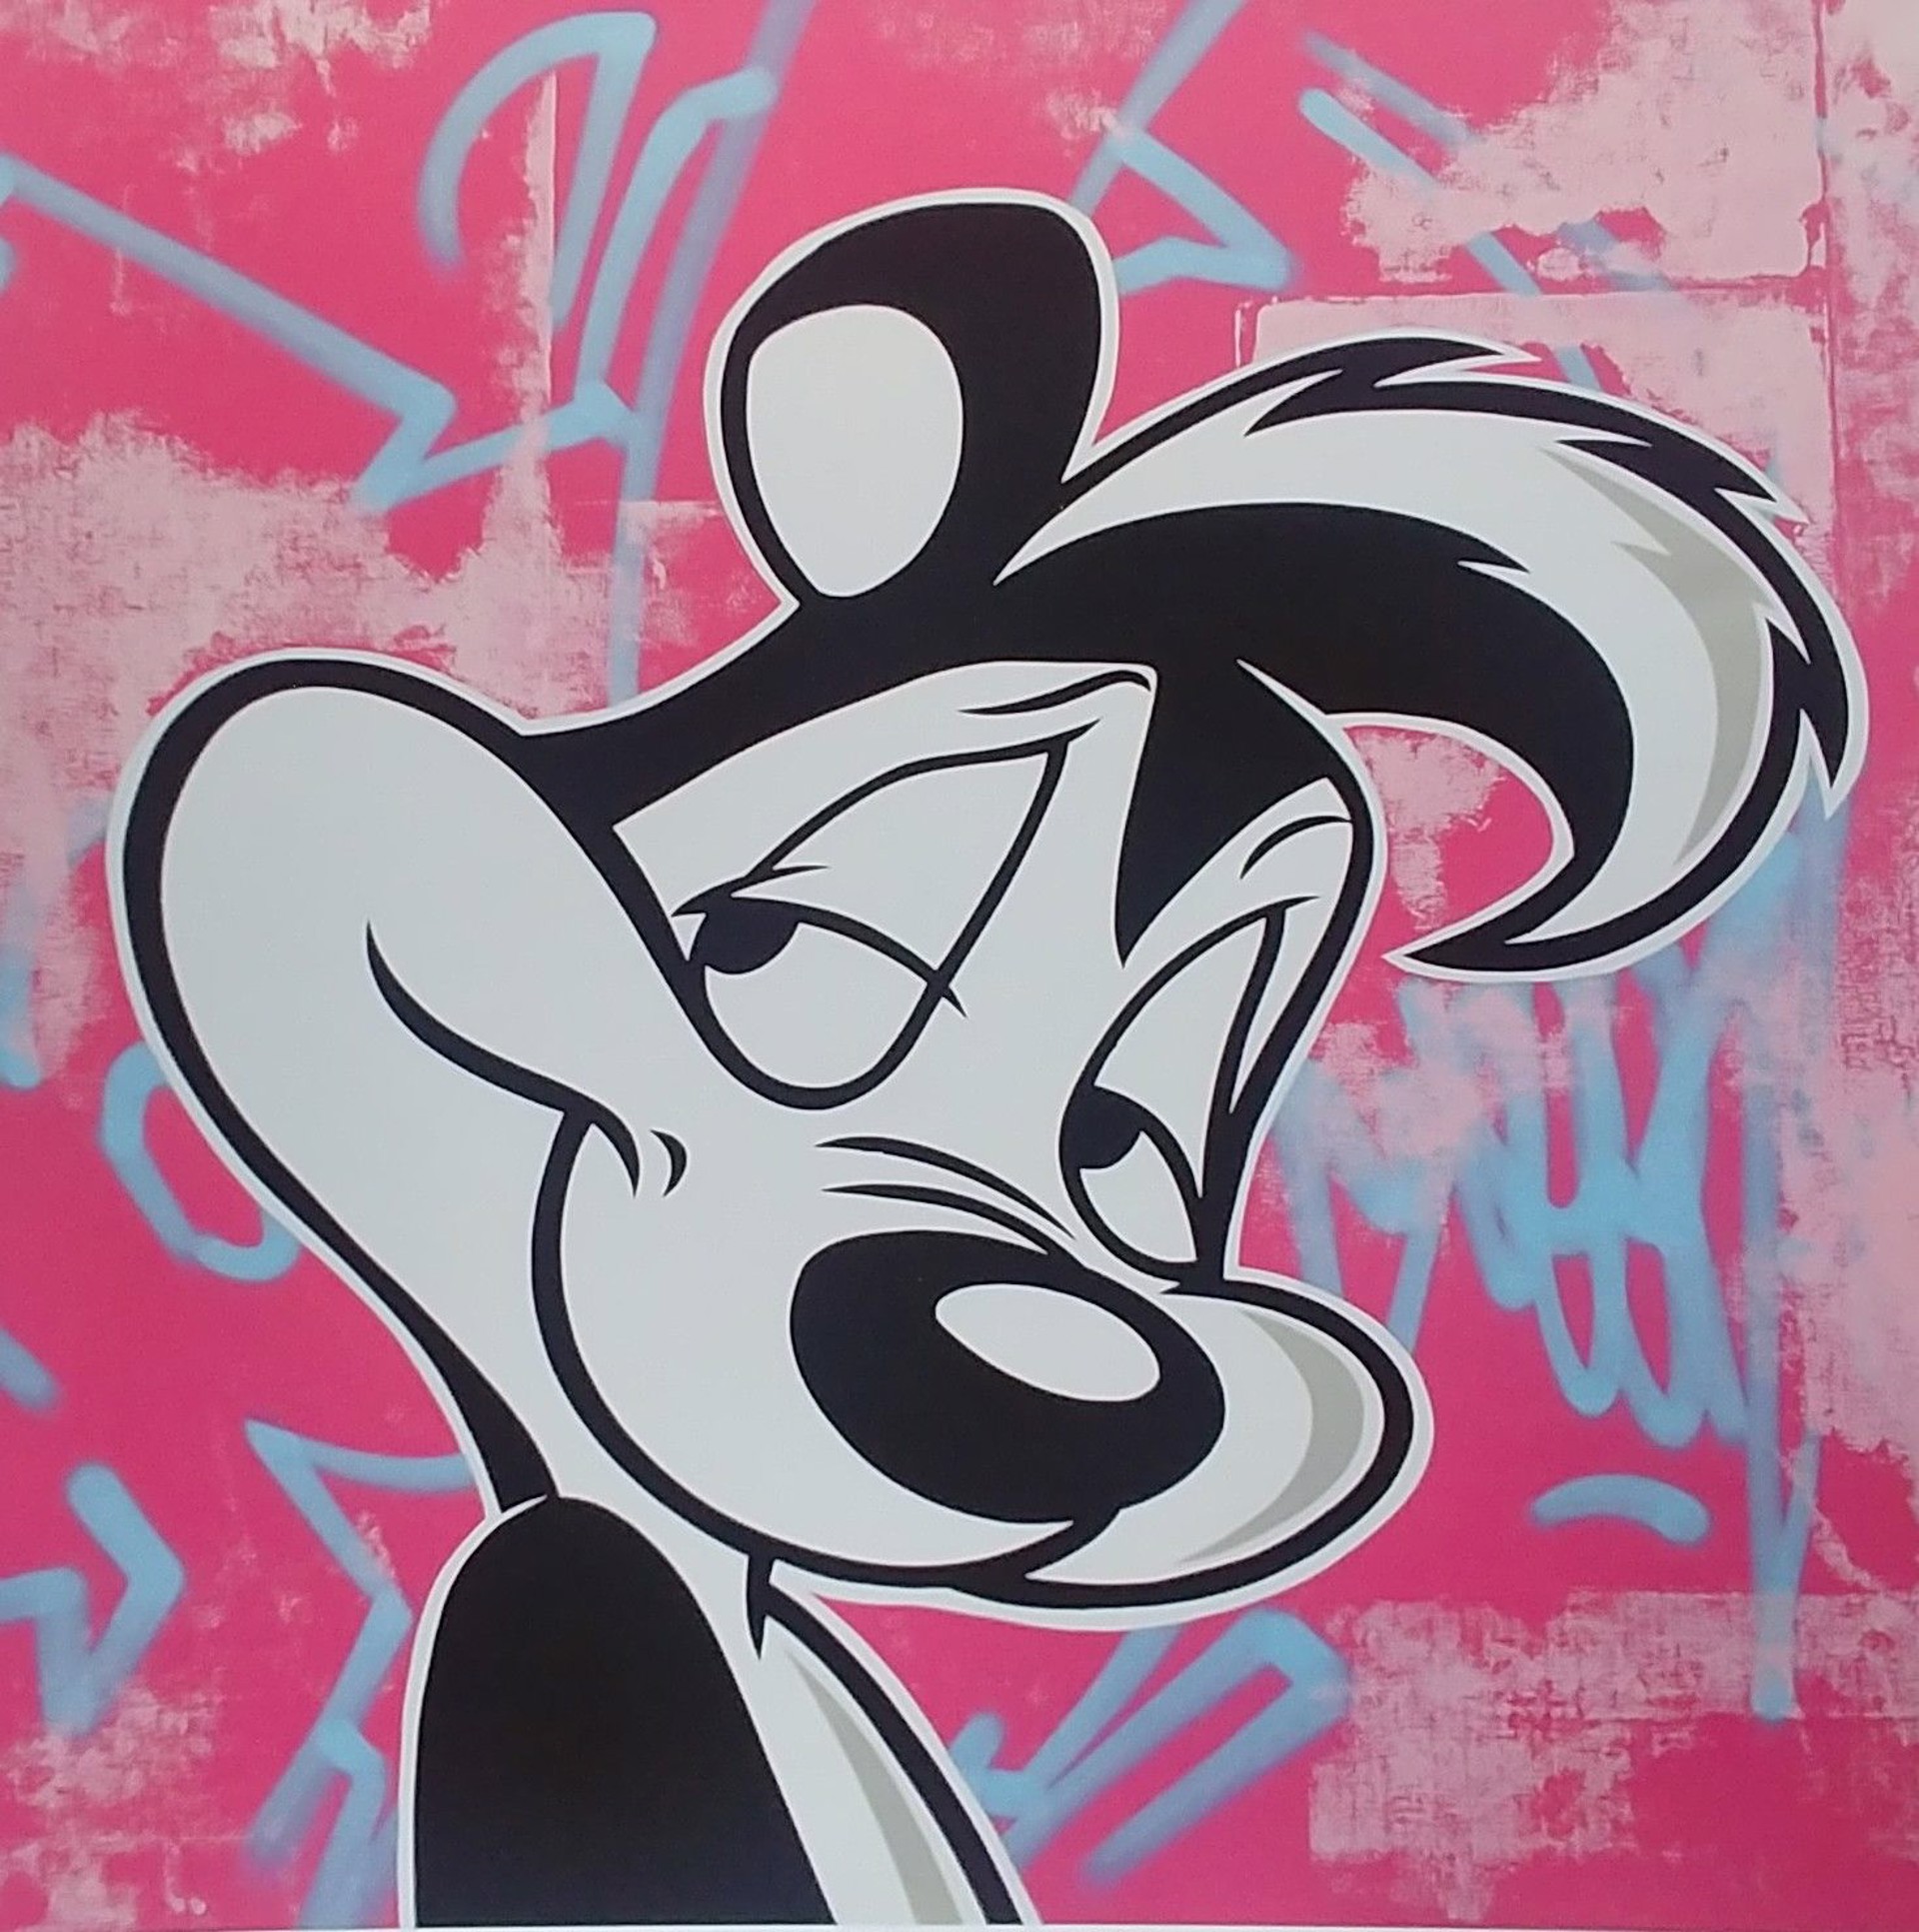 Pepe Le Pew (2/25) by Seen